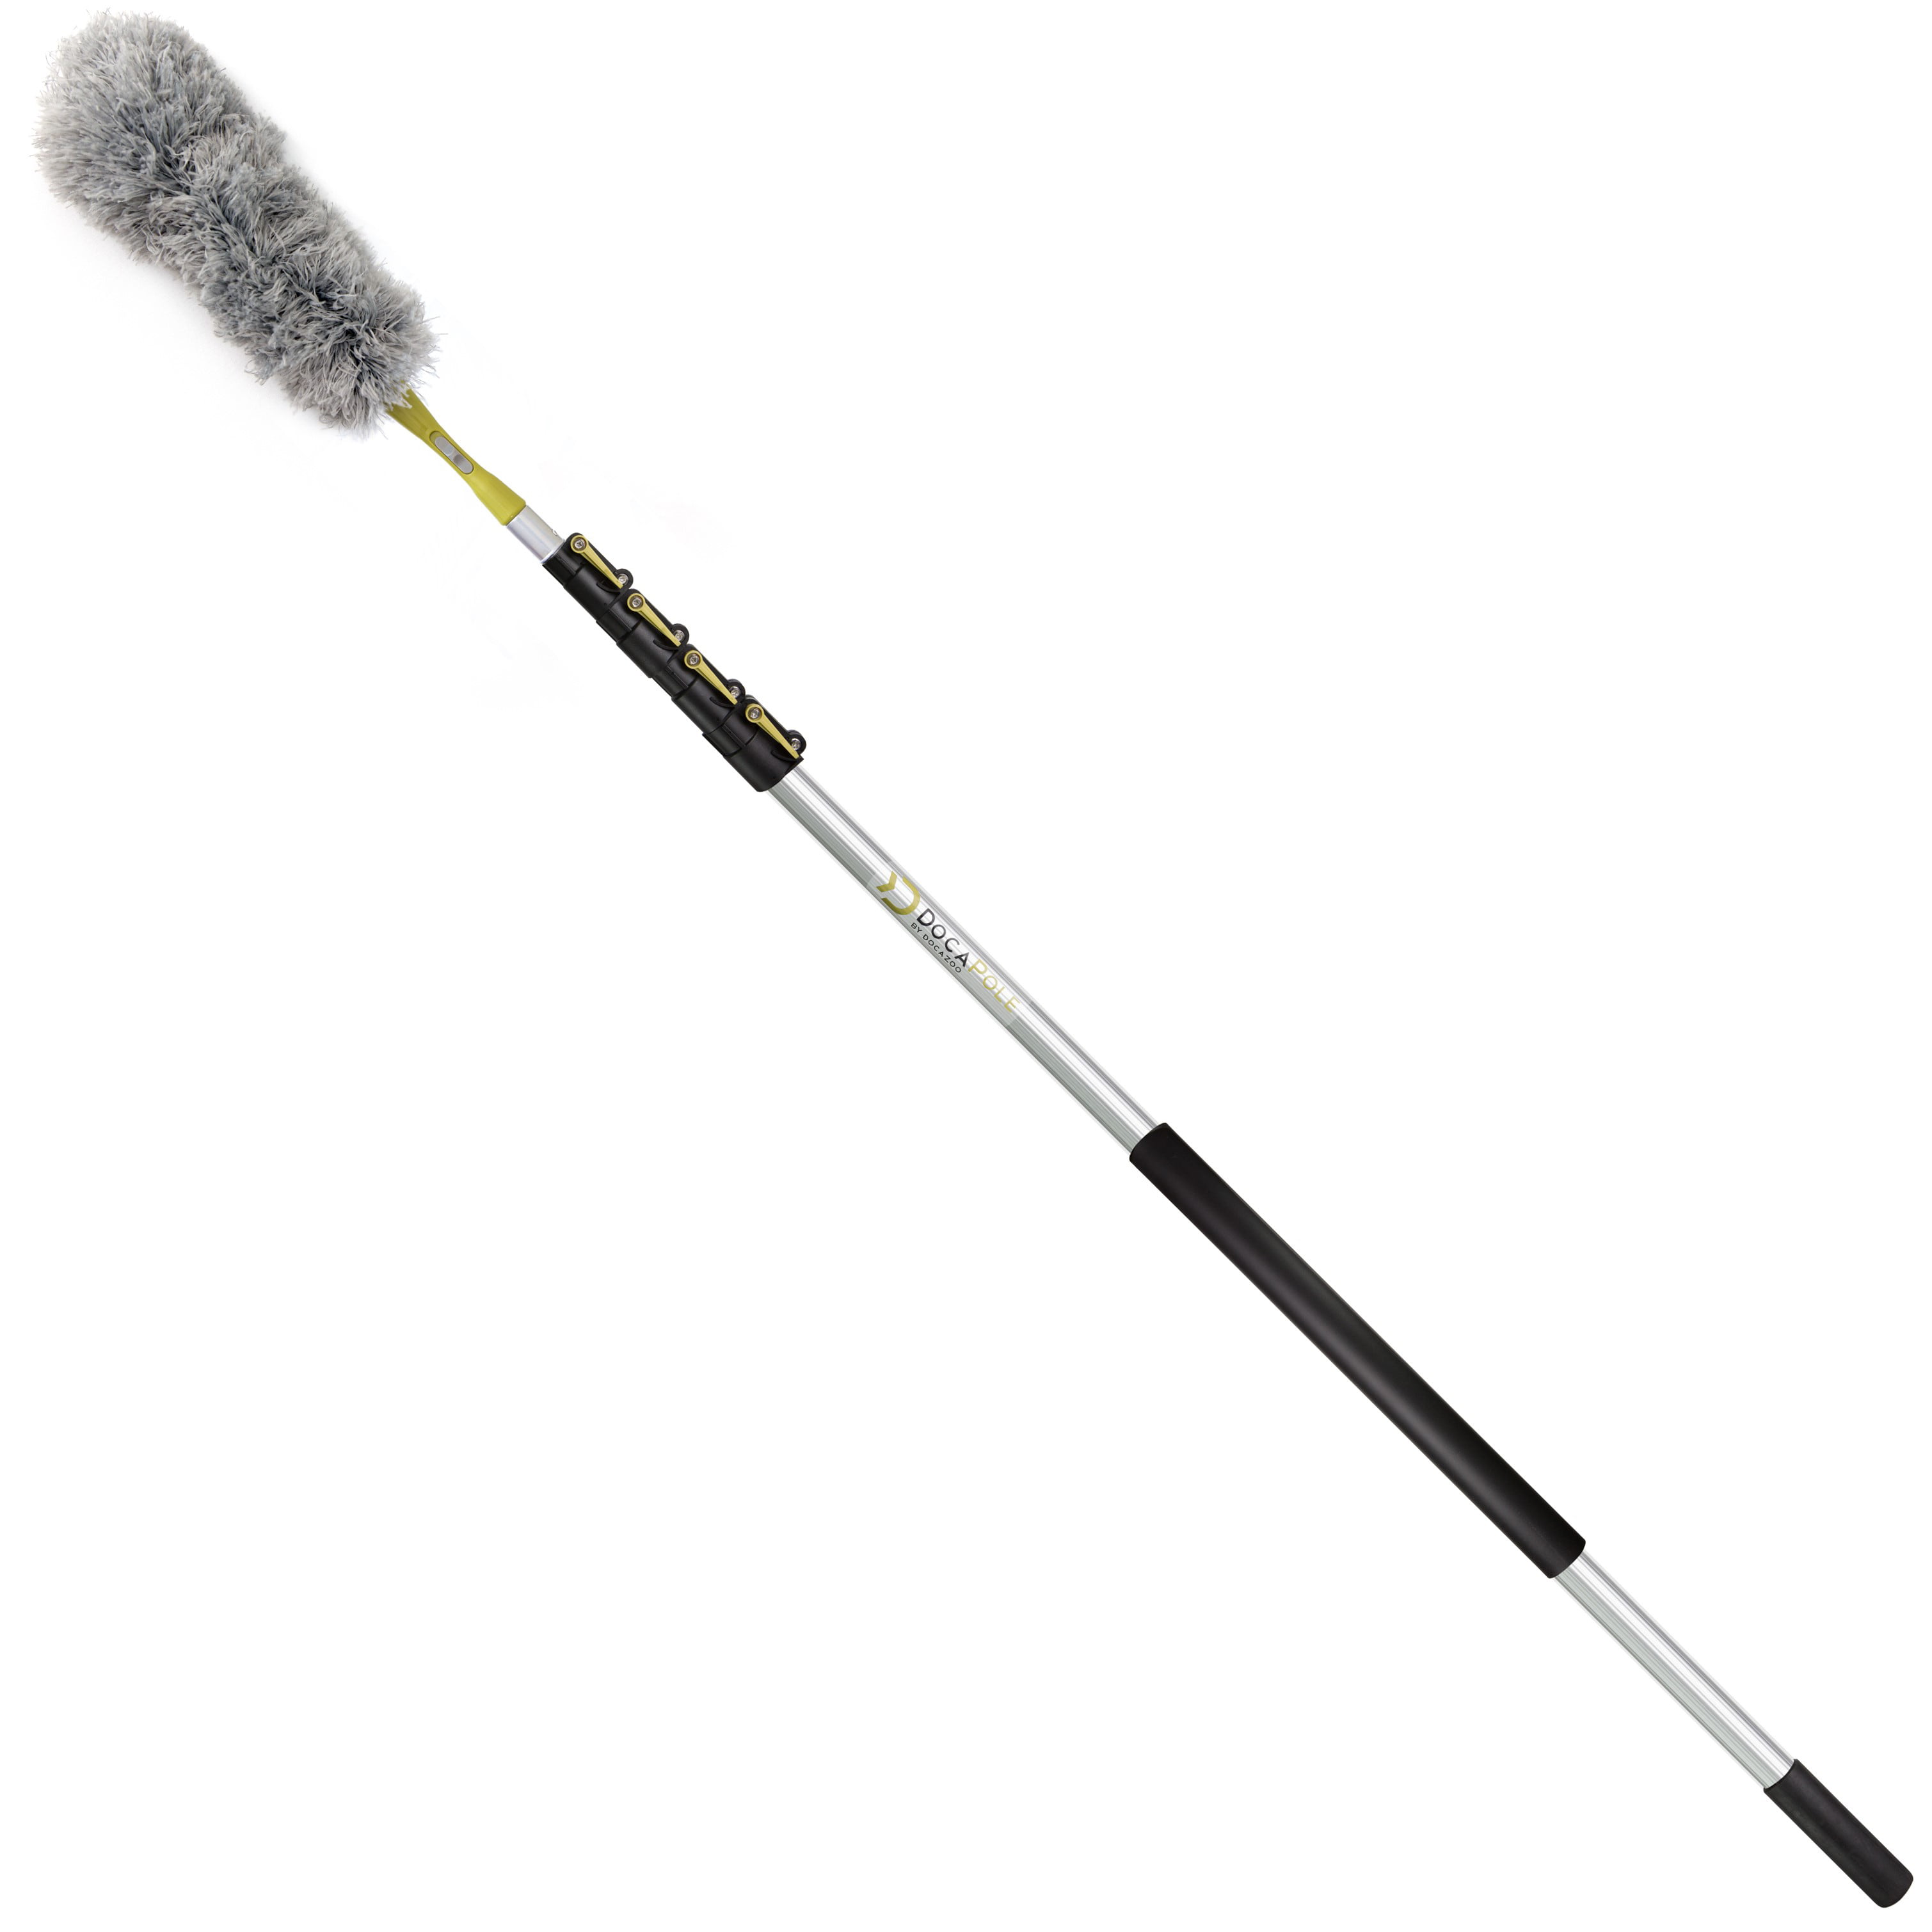 1 Window Squeegee & Washer // Cobweb Duster // Microfiber Feather Duster // Ceiling Fan Duster & Cleaner DocaPole Cleaning Kit with 24 Foot Extension Pole // Includes 3 Dusting Attachments